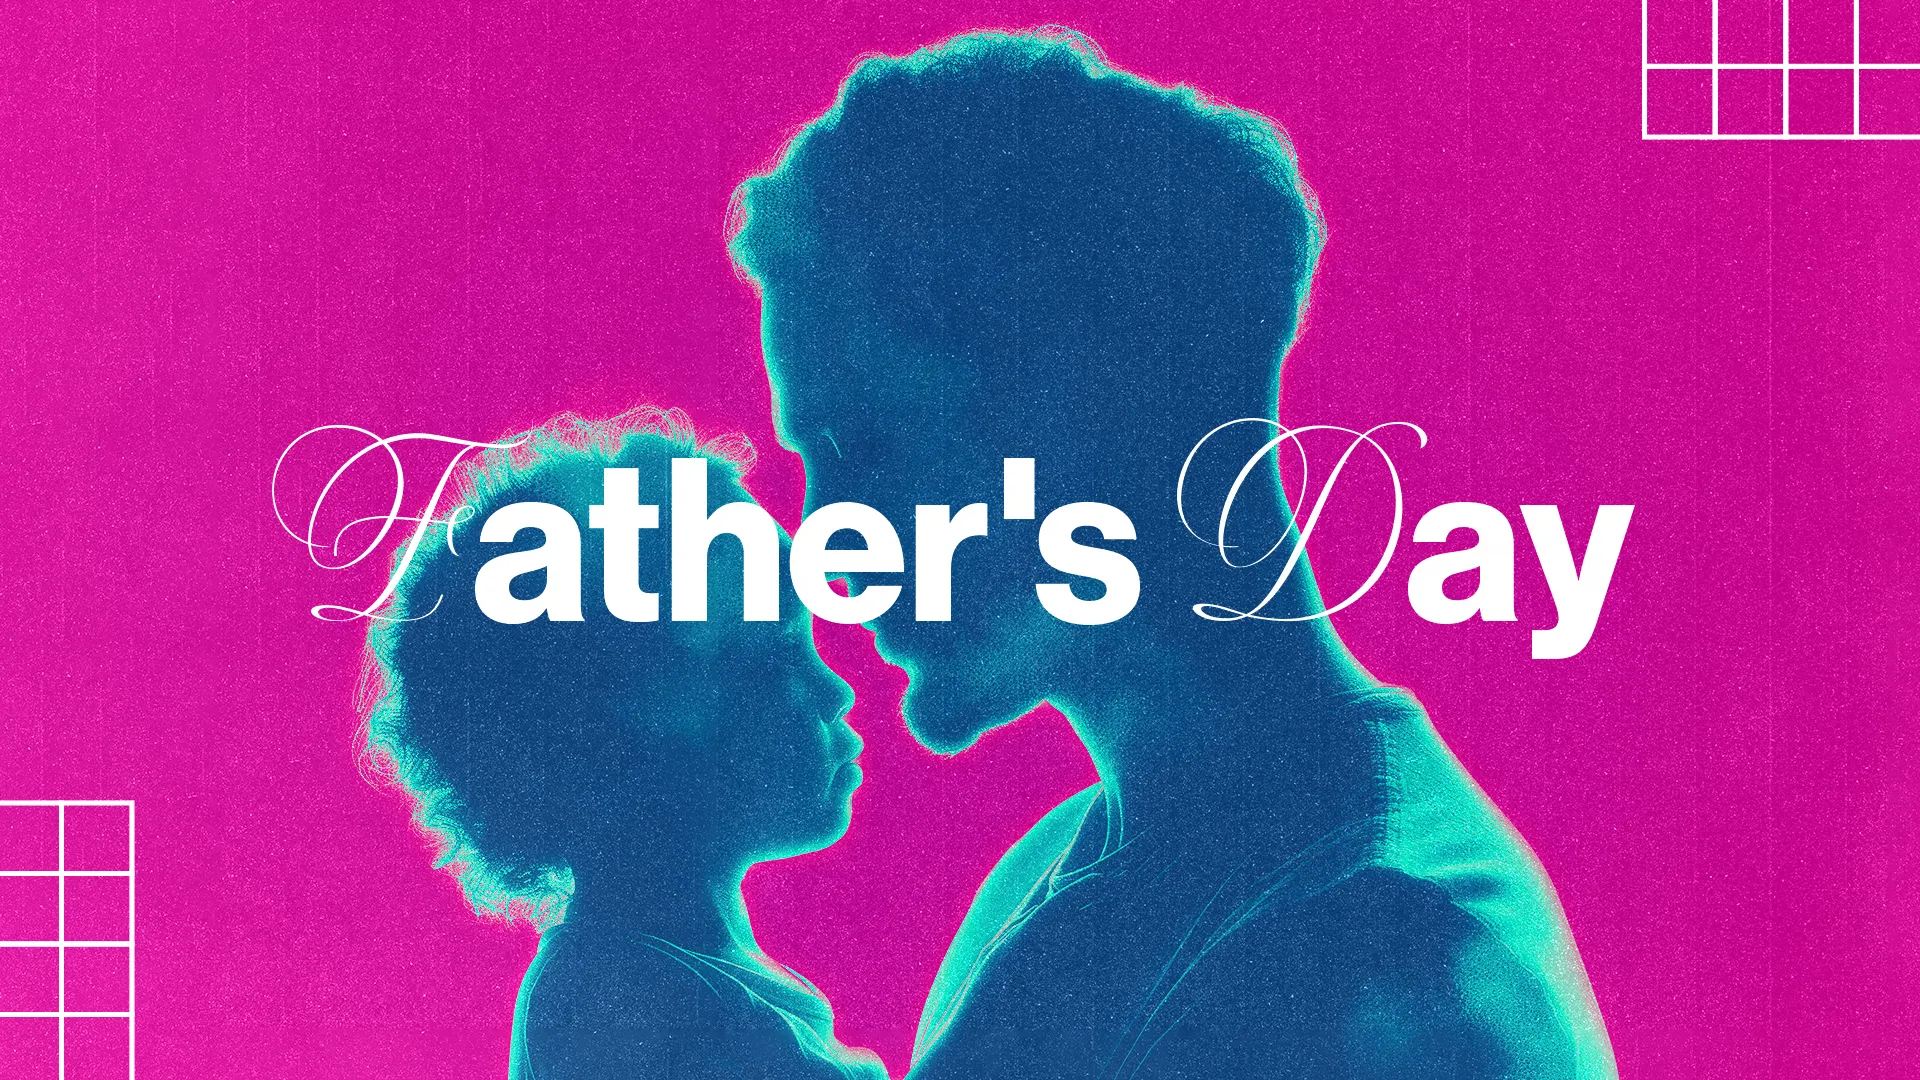 Brighten Up Your Father'S Day Service With This Modern And Vibrant Graphic. Its Bold Use Of Color And Minimalist Design Makes It Perfect For A Contemporary Church Event Celebrating Dads.